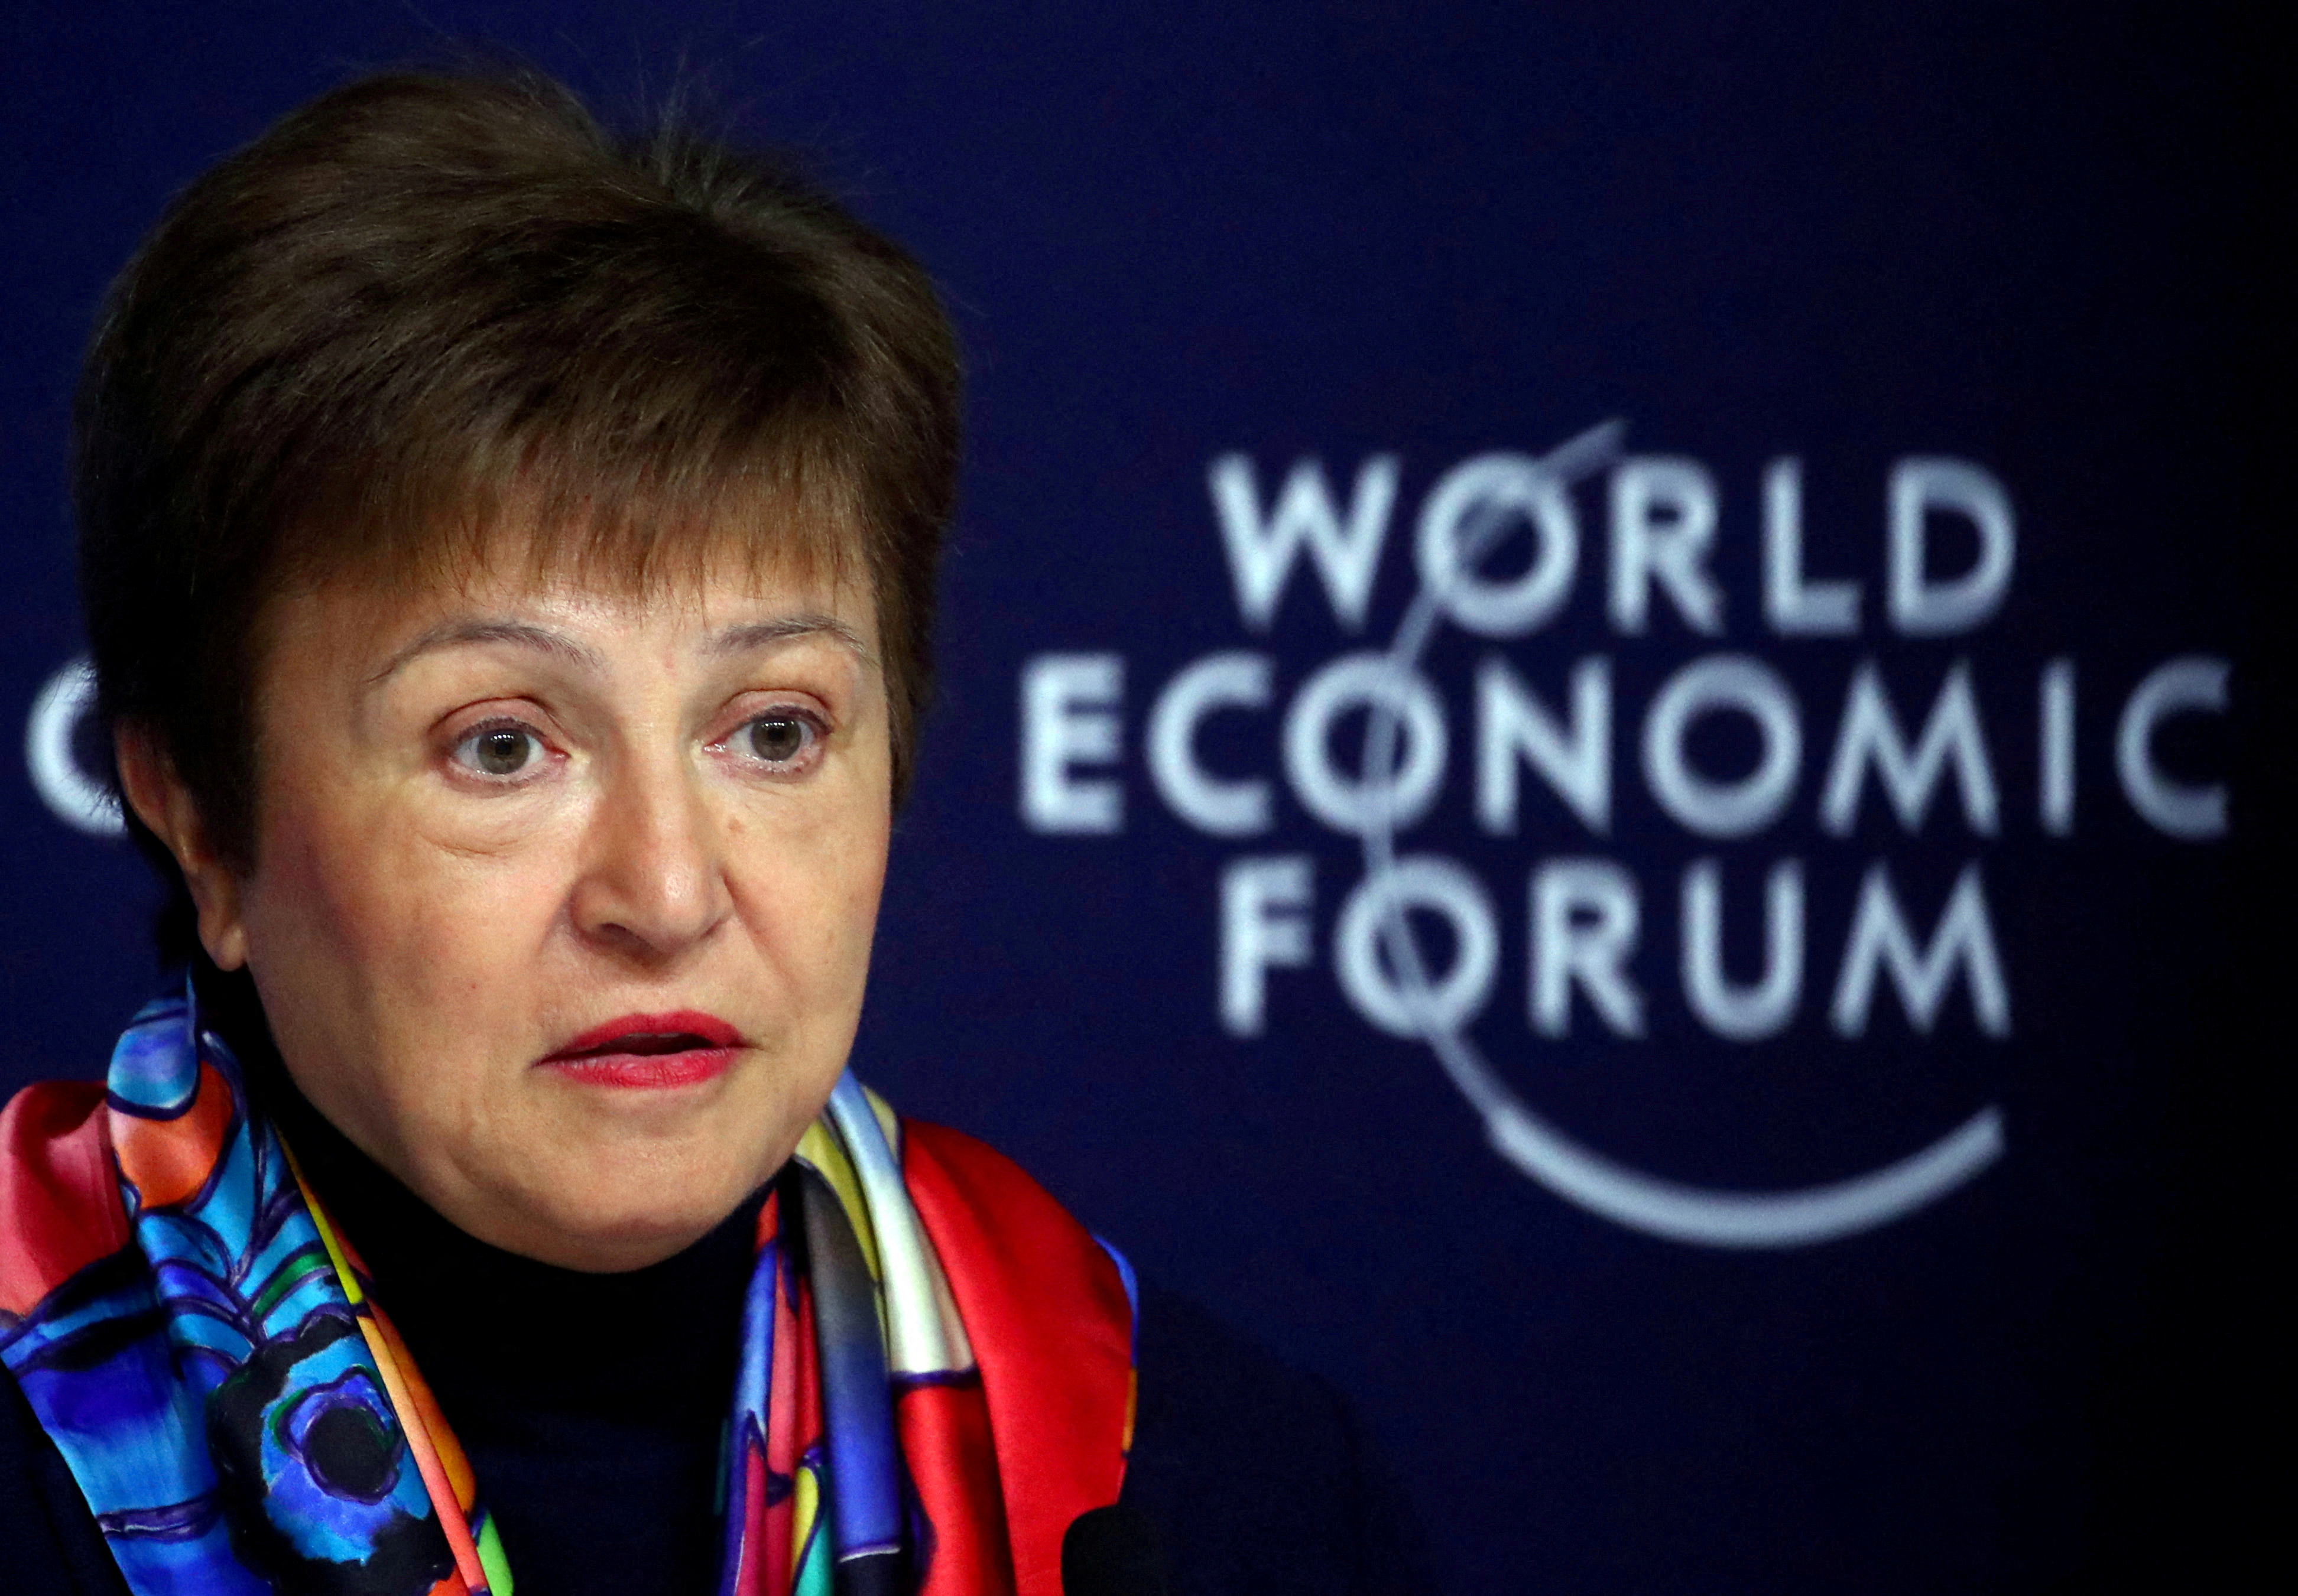 IMF news conference ahead of the World Economic Forum (WEF) in Davos